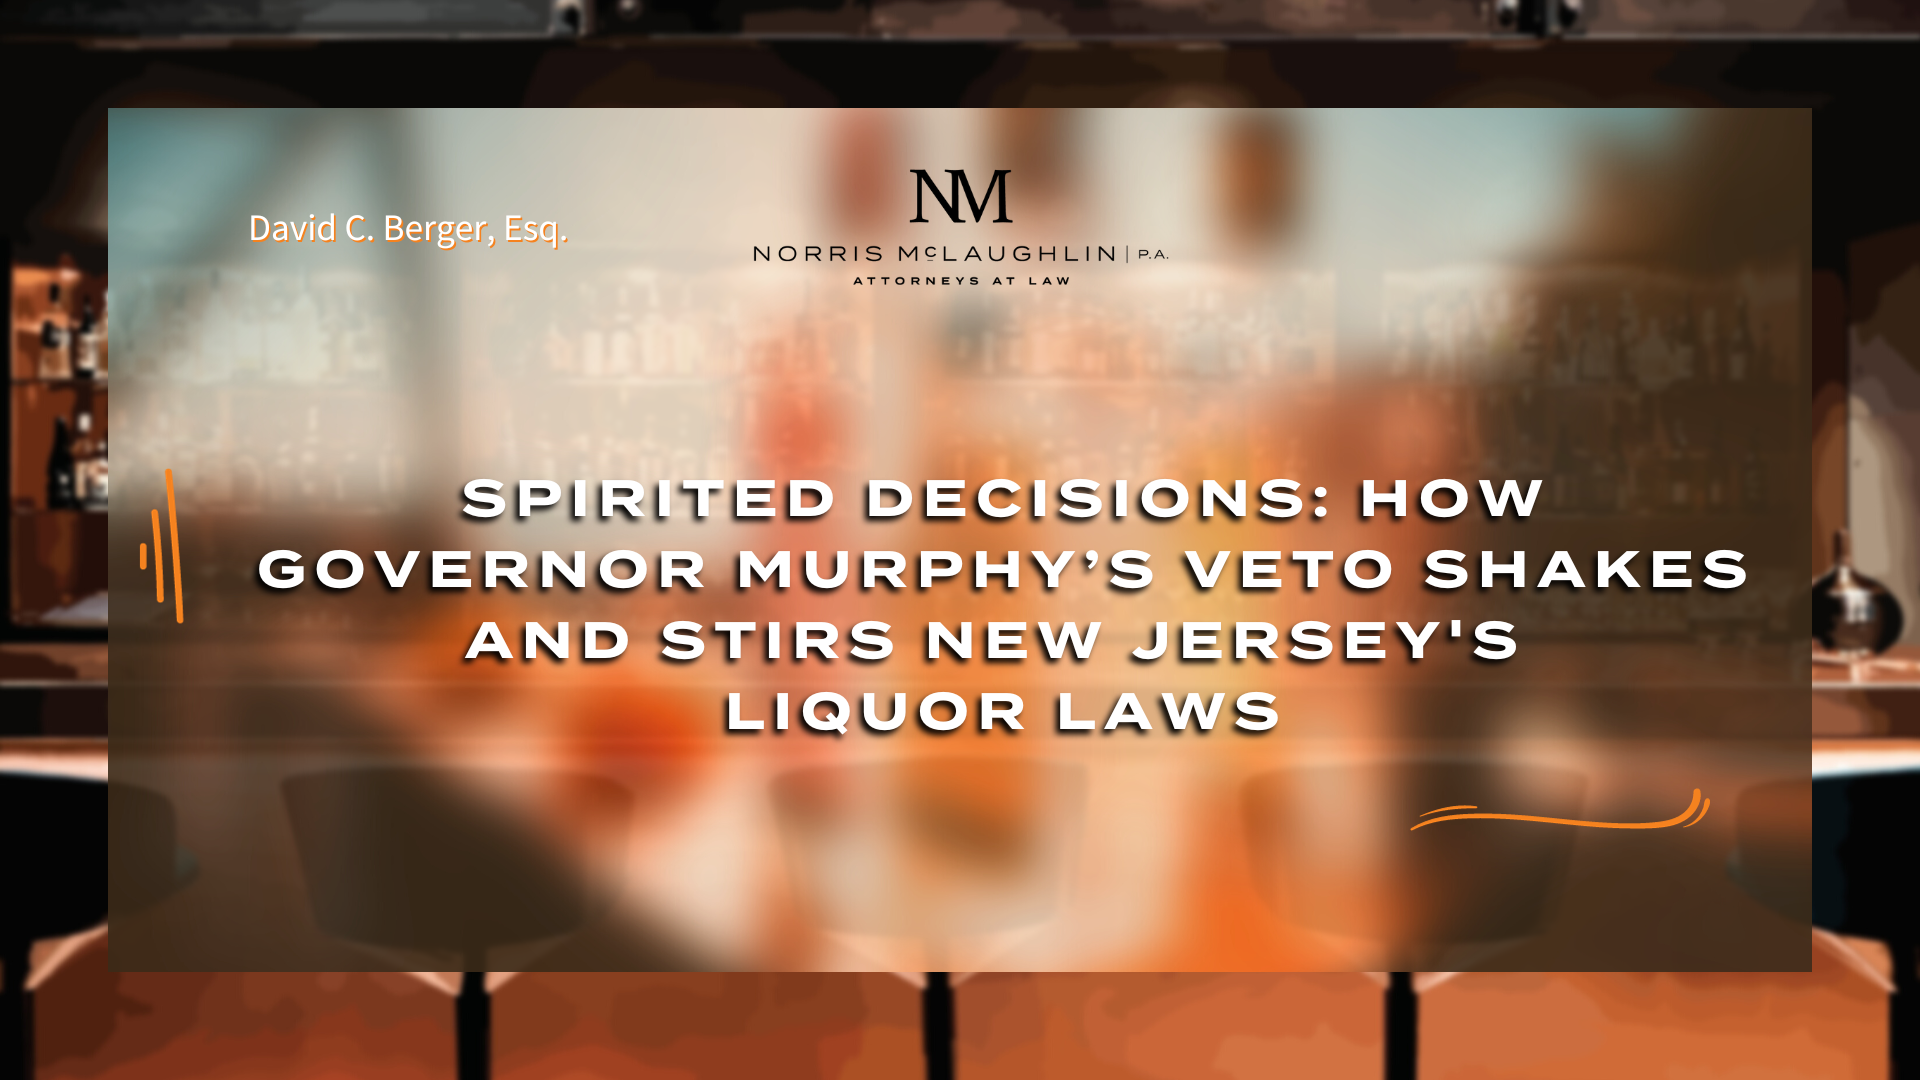 Spirited Decisions: How Governor Murphy’s Veto Shakes and Stirs New Jersey’s Liquor Laws